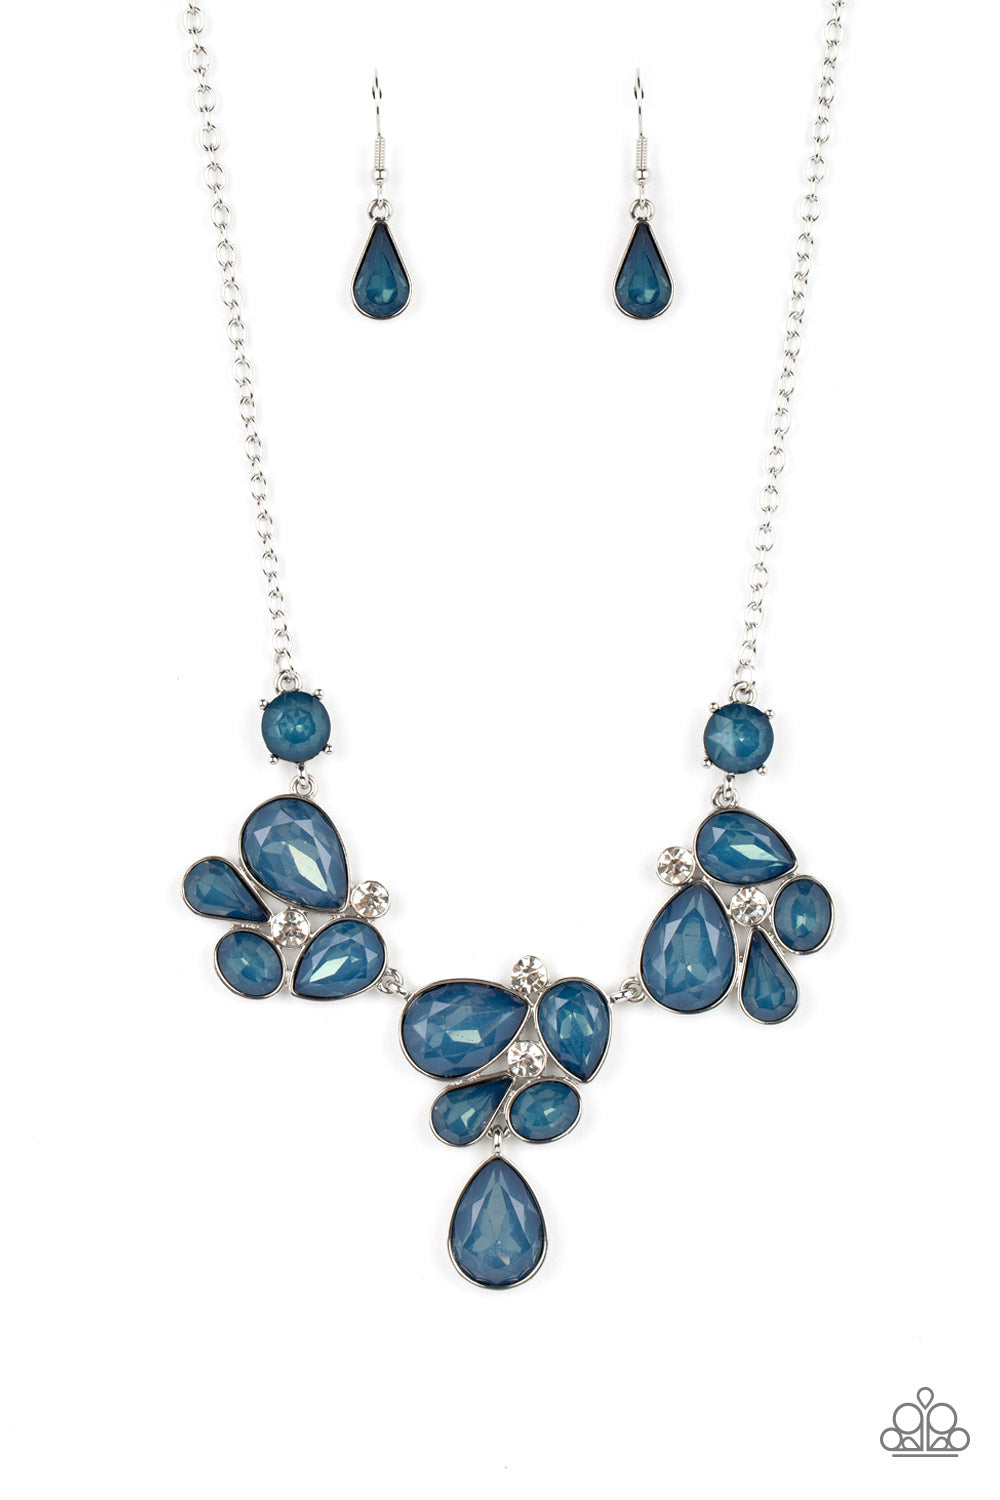 Paparazzi Accessories Everglade Escape - Blue Convention Necklaces draped elegantly across the chest, clusters of geometric blue gems, brushed in the fall Pantone® of Midnight, gather around sparkling white rhinestones, creating a bright and beautiful pattern. Features an adjustable clasp closure.  Sold as one individual necklace. Includes one pair of matching earrings.  2022 Glow Convention 